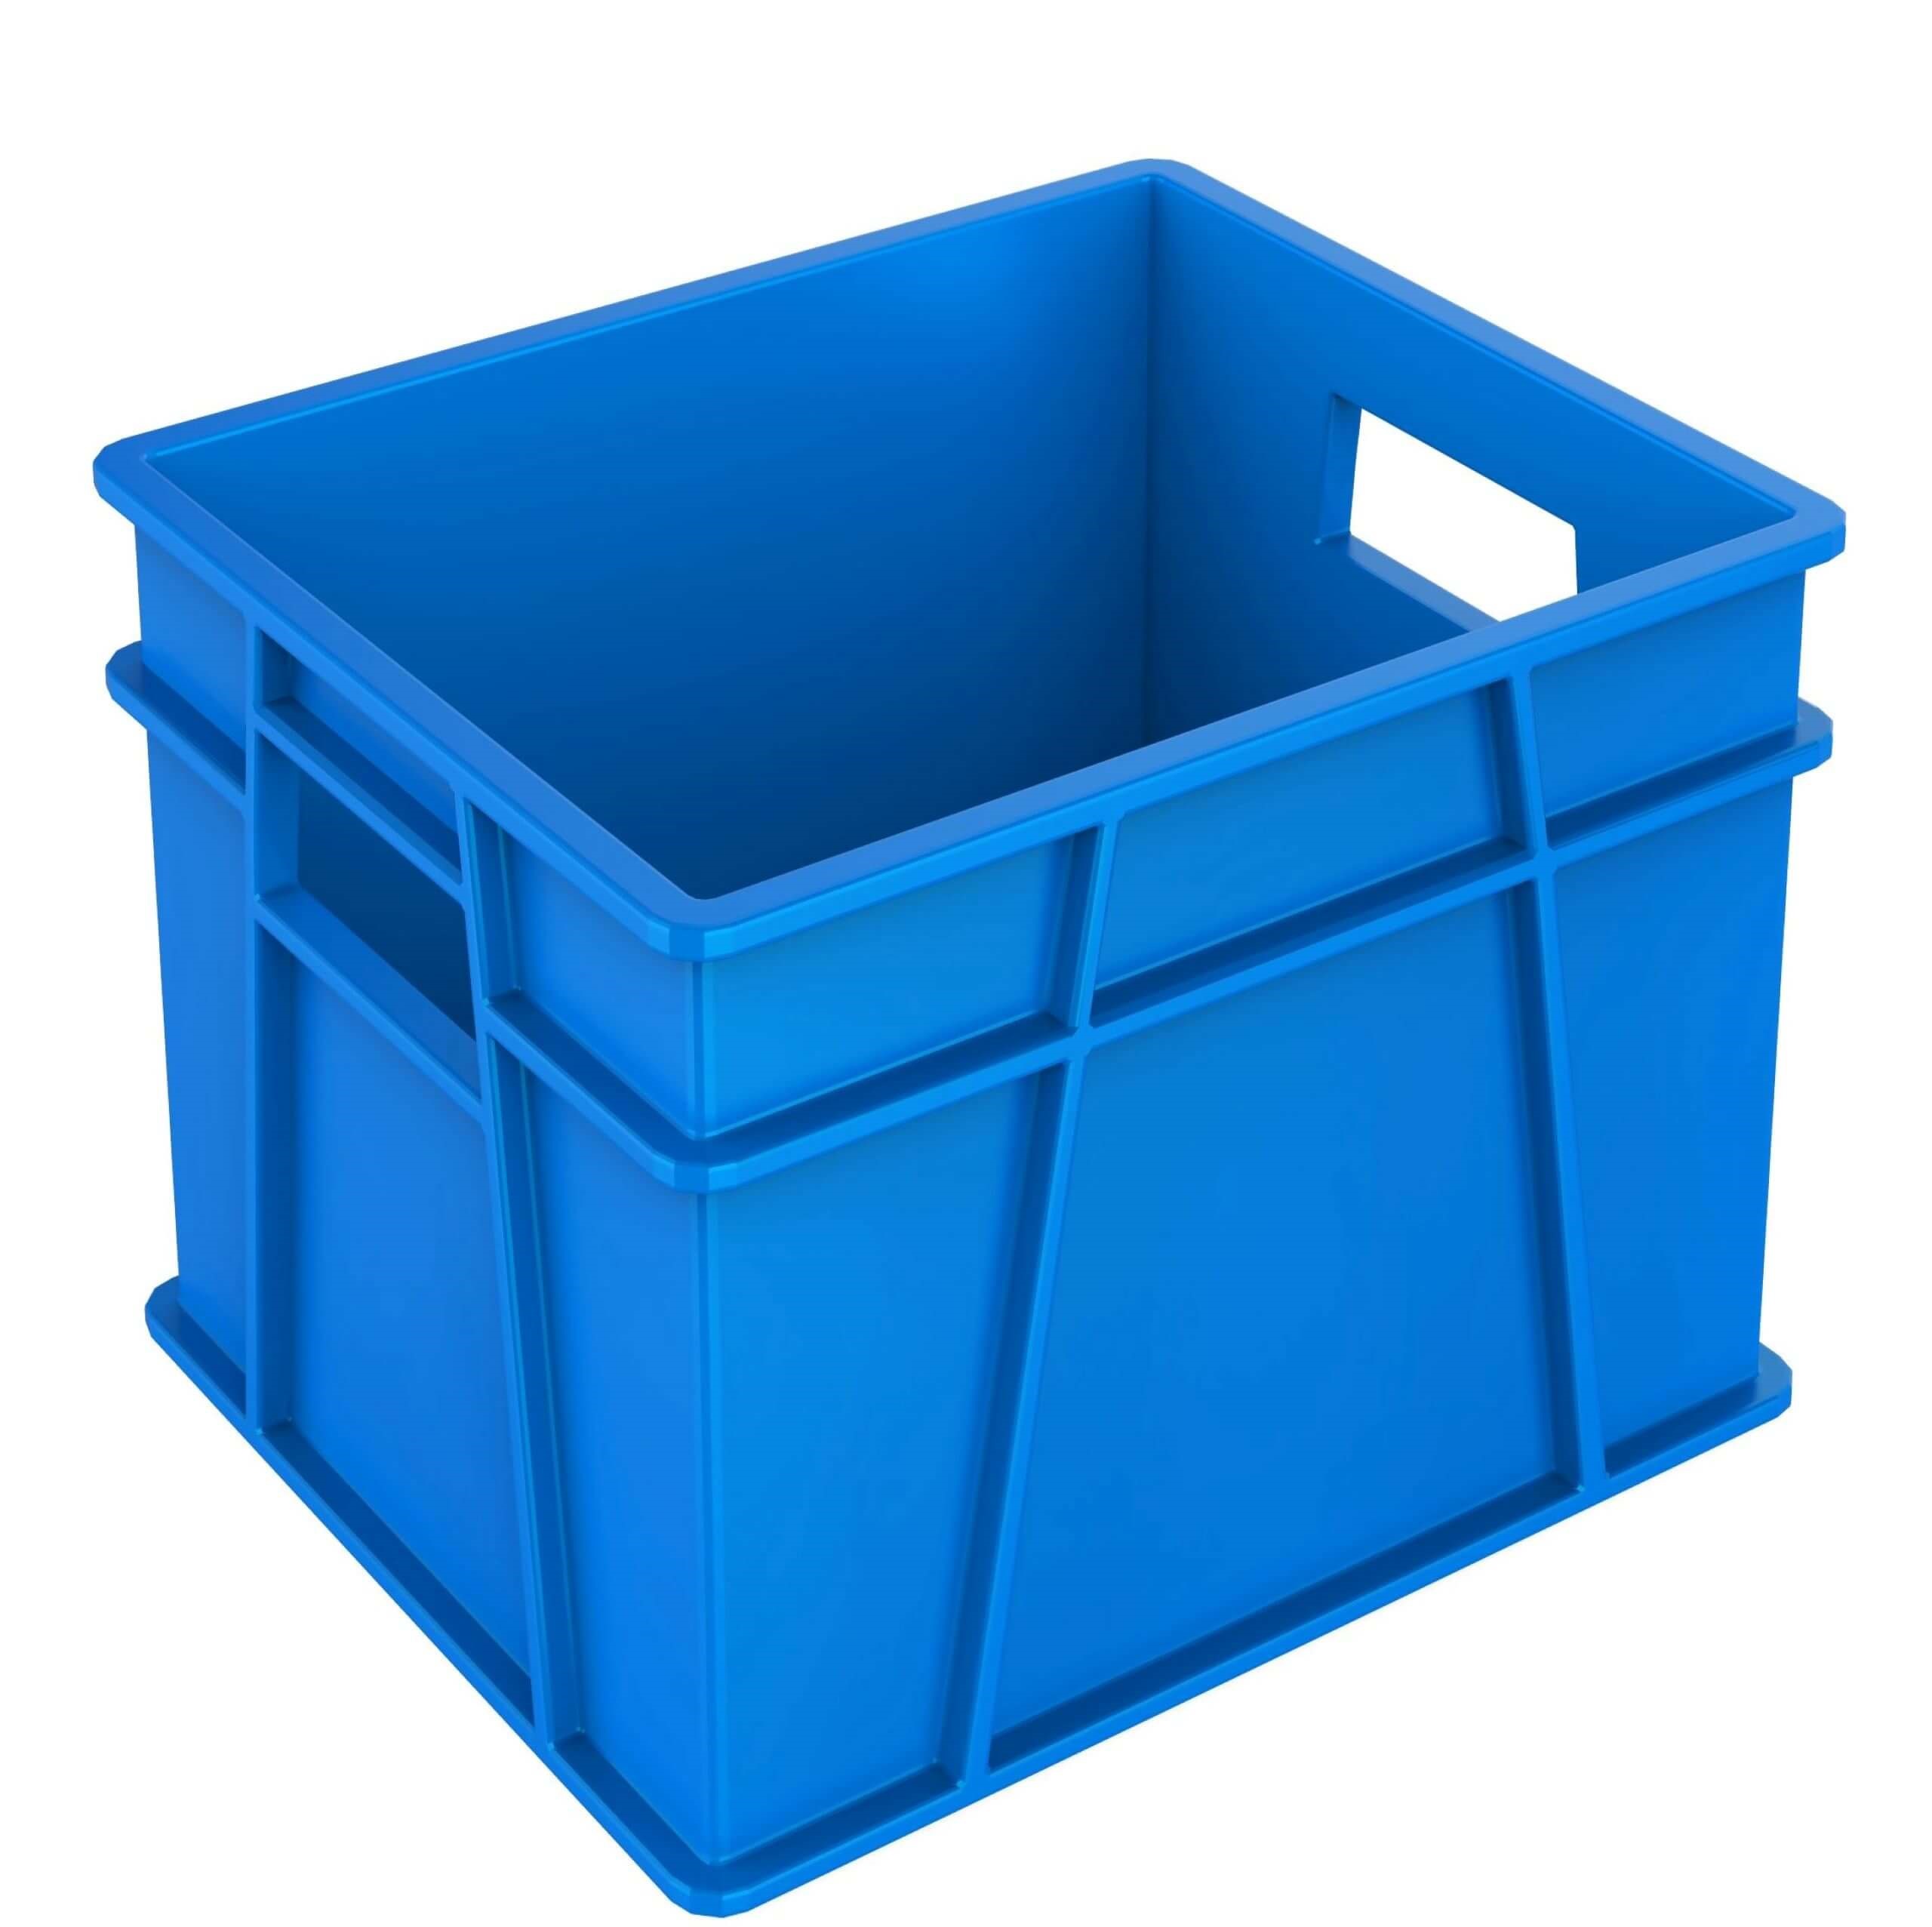 An image of a euro container box.